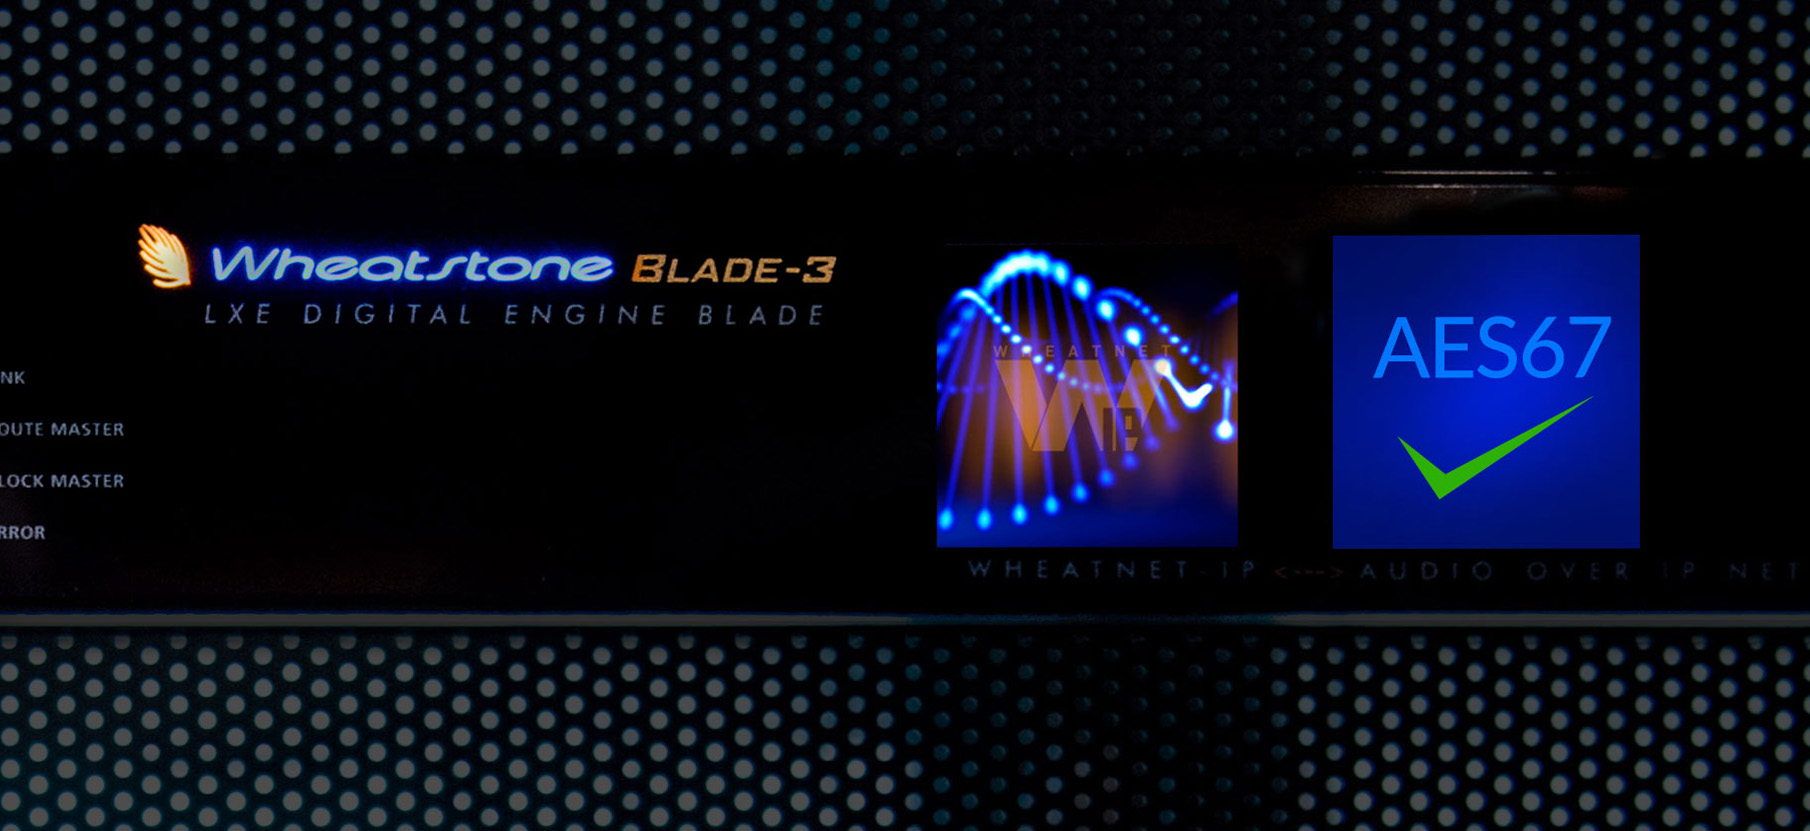 BLADES AES67